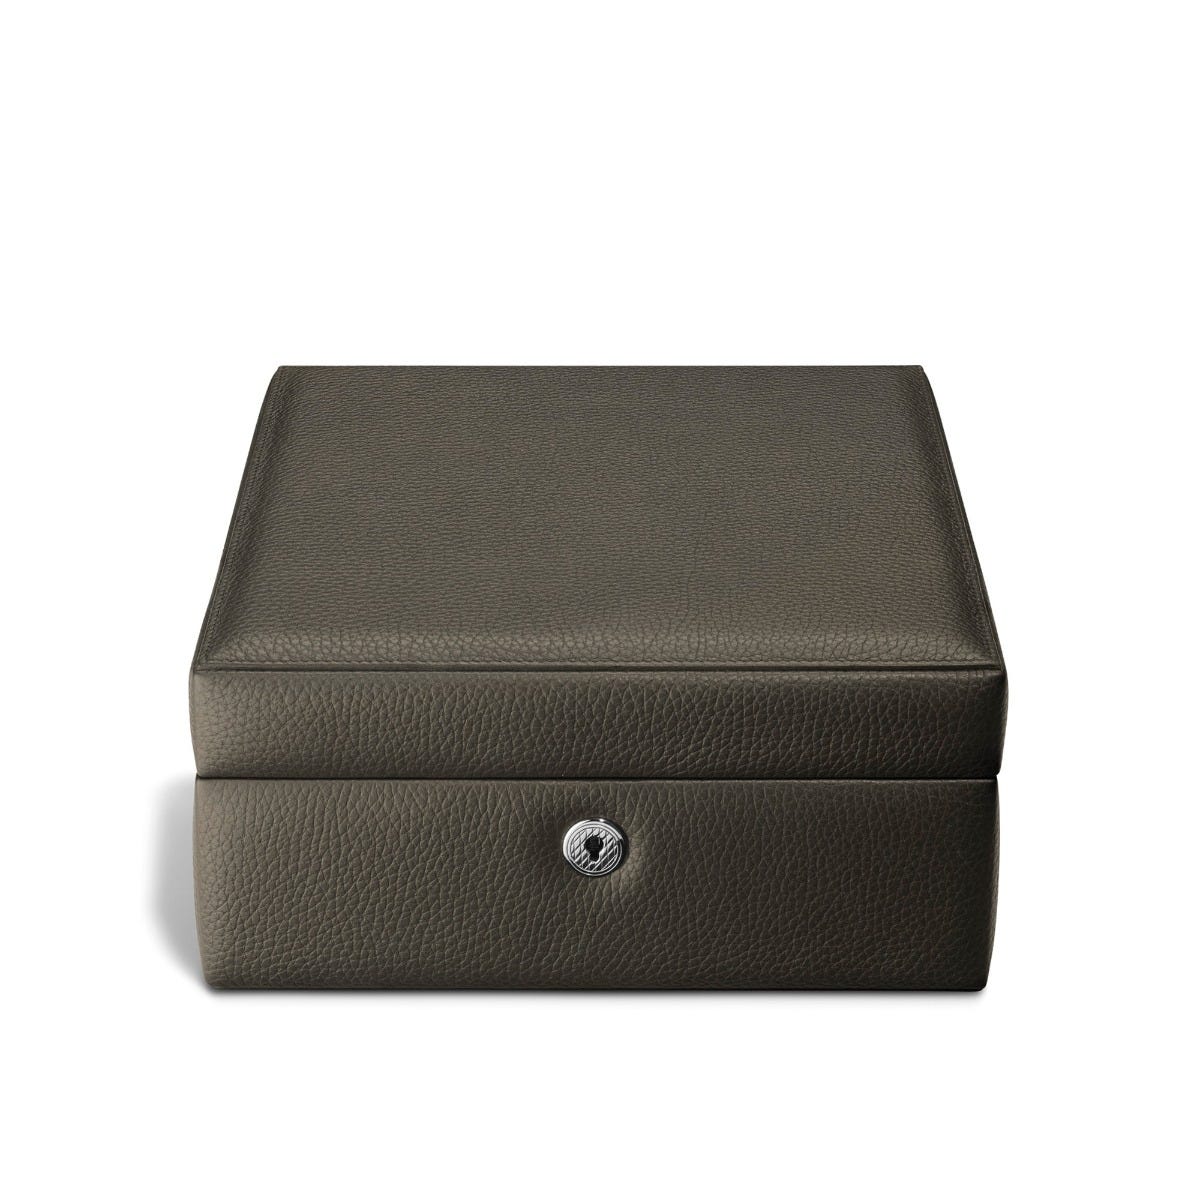 GMT Watch Box 6 in Soft Grain Leather